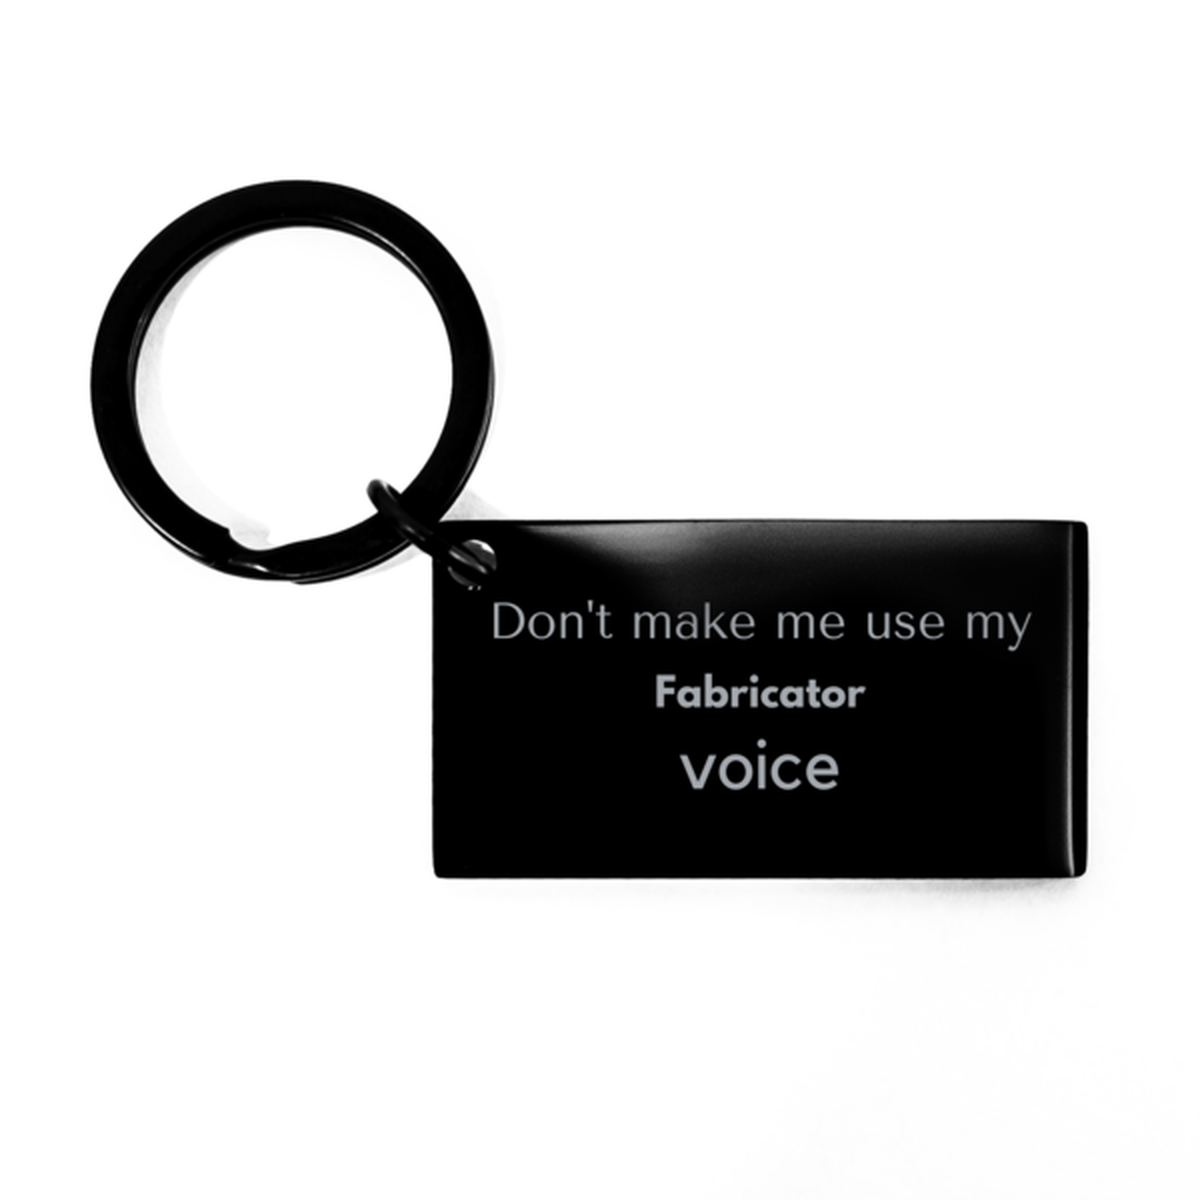 Don't make me use my Fabricator voice, Sarcasm Fabricator Gifts, Christmas Fabricator Keychain Birthday Unique Gifts For Fabricator Coworkers, Men, Women, Colleague, Friends